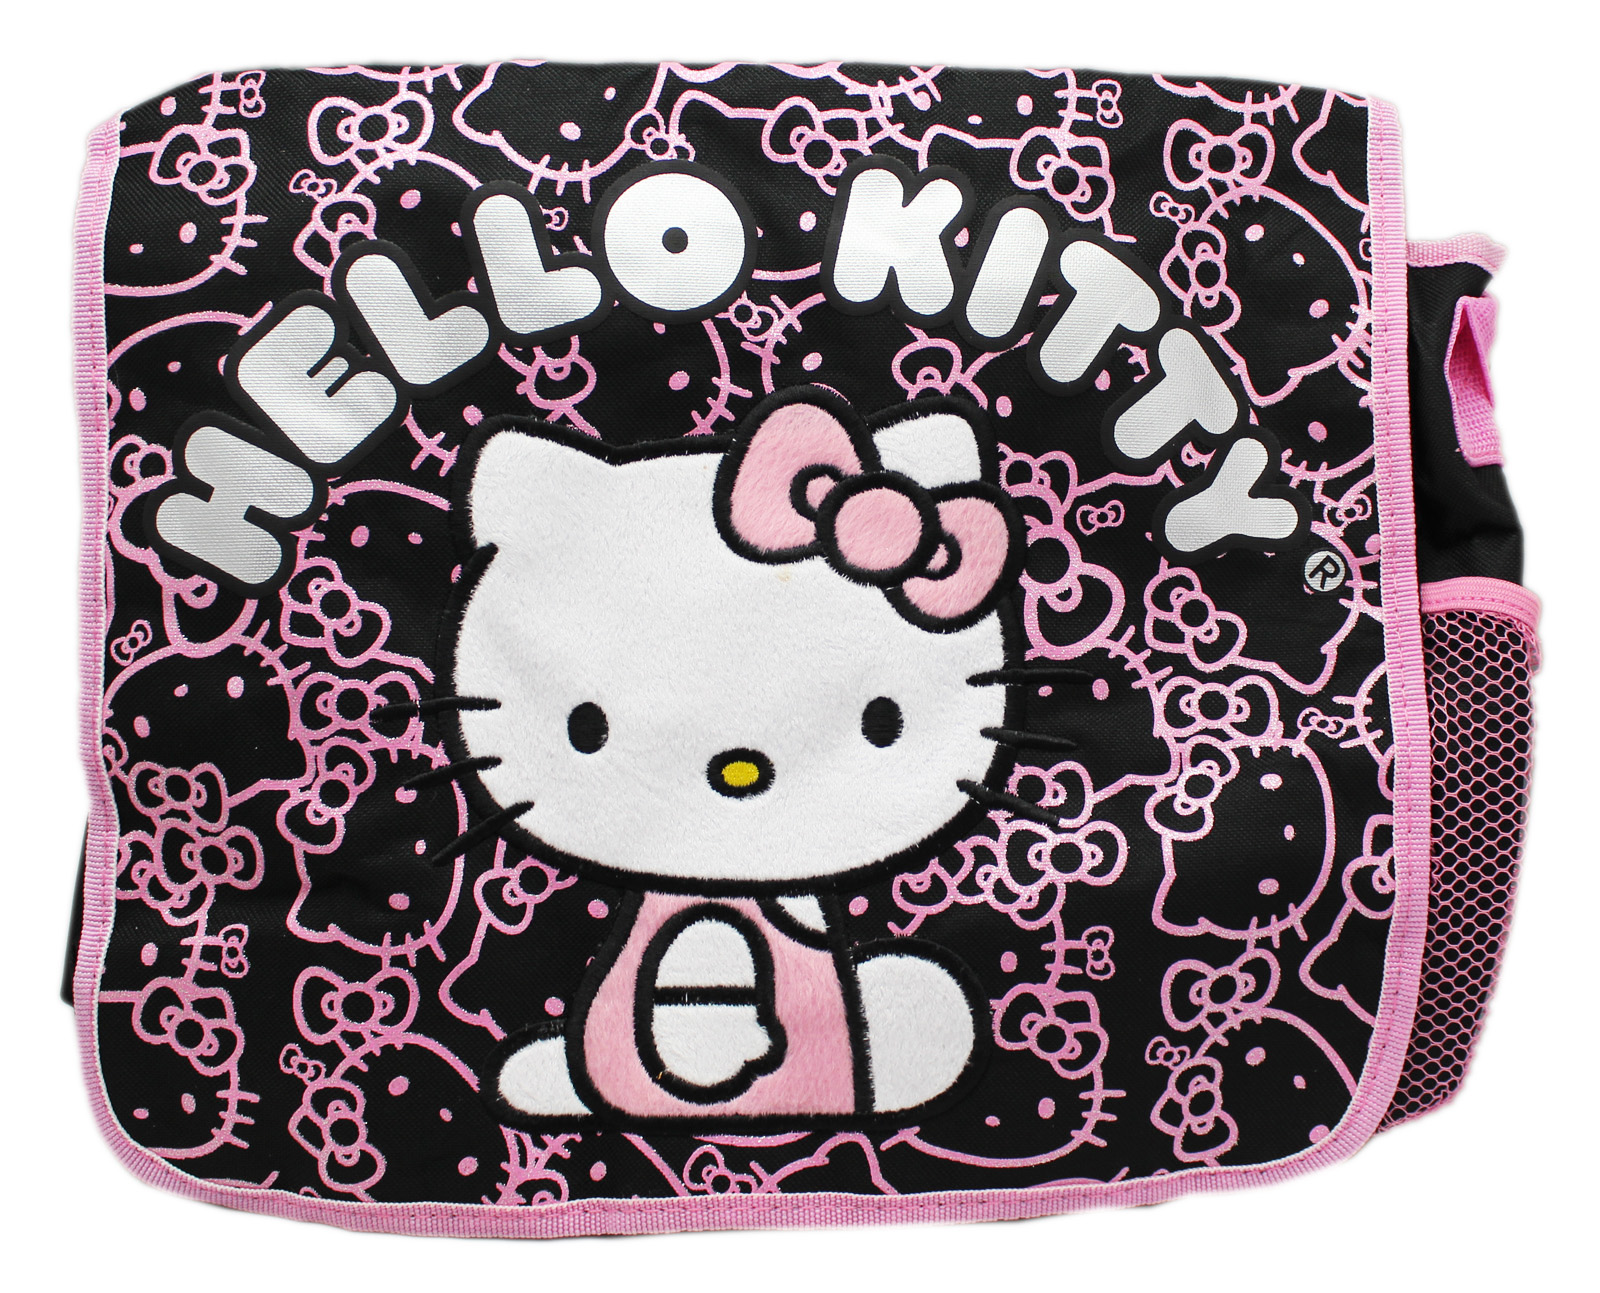 Sanrio's Hello Kitty Face and Bow Pattern Black/Pink Messenger Bag - image 1 of 1